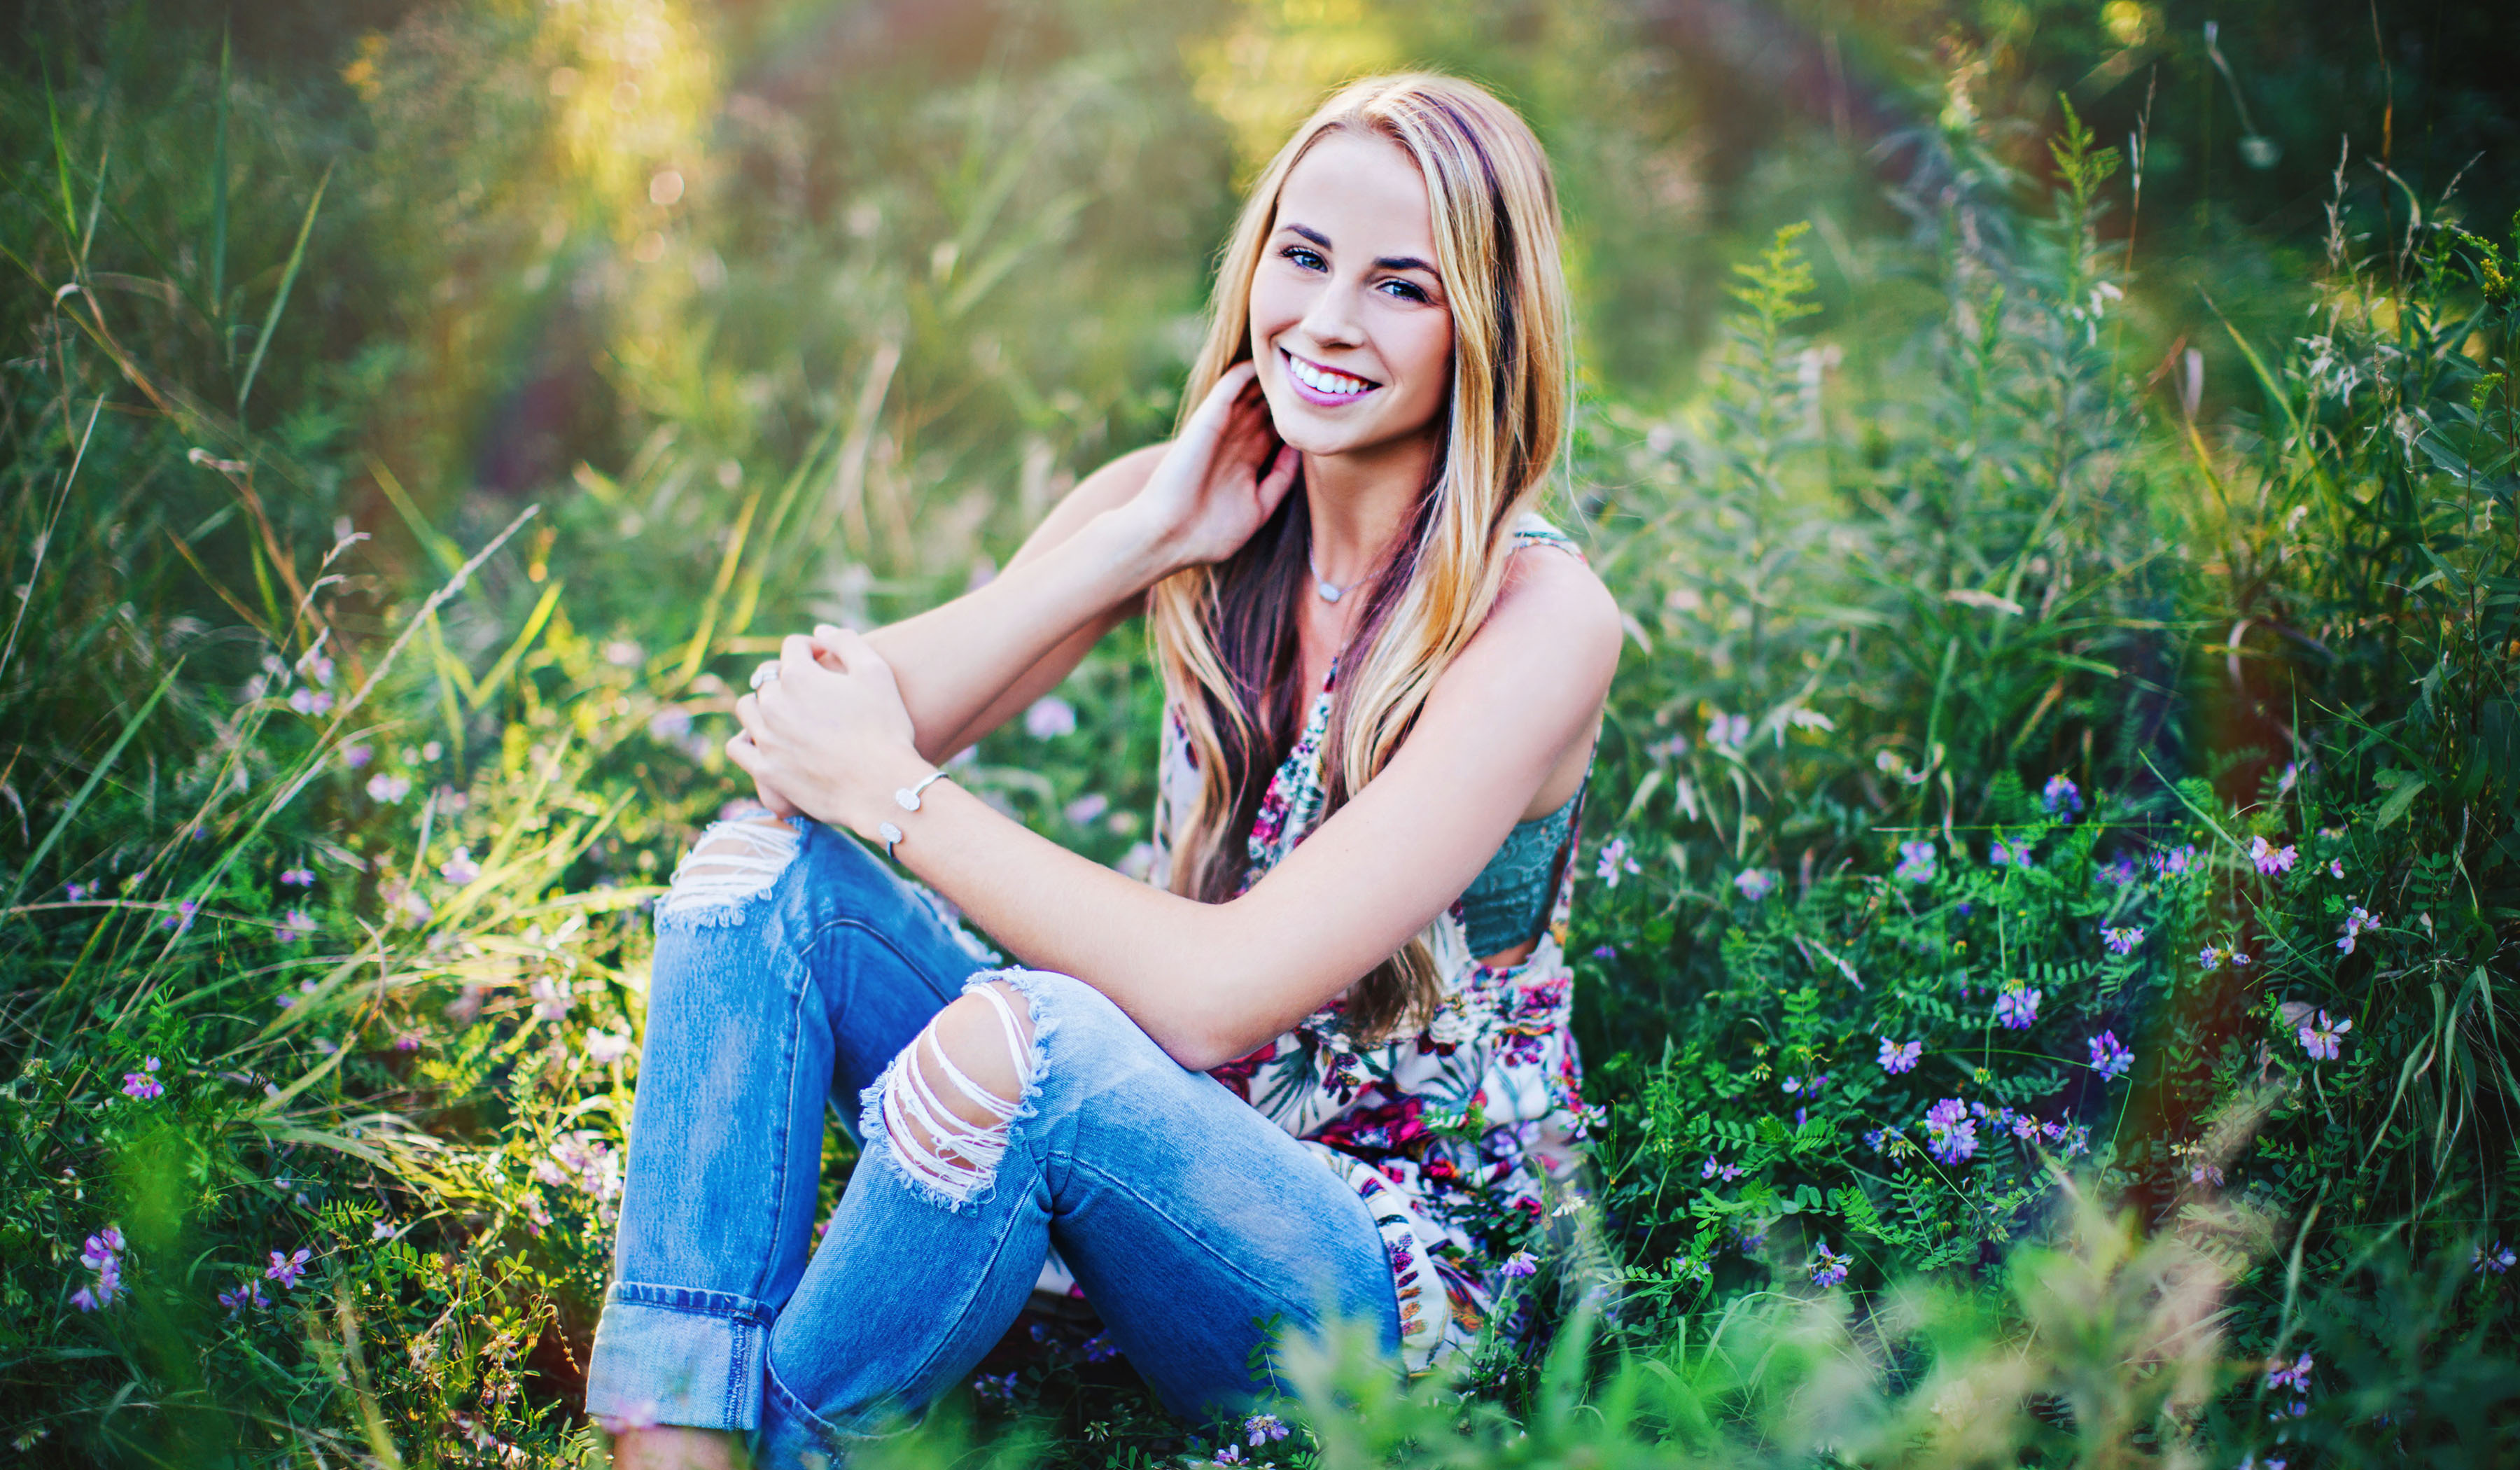 hartland-wi-senior-pictures-archives-faith-photography-of-wisconsin